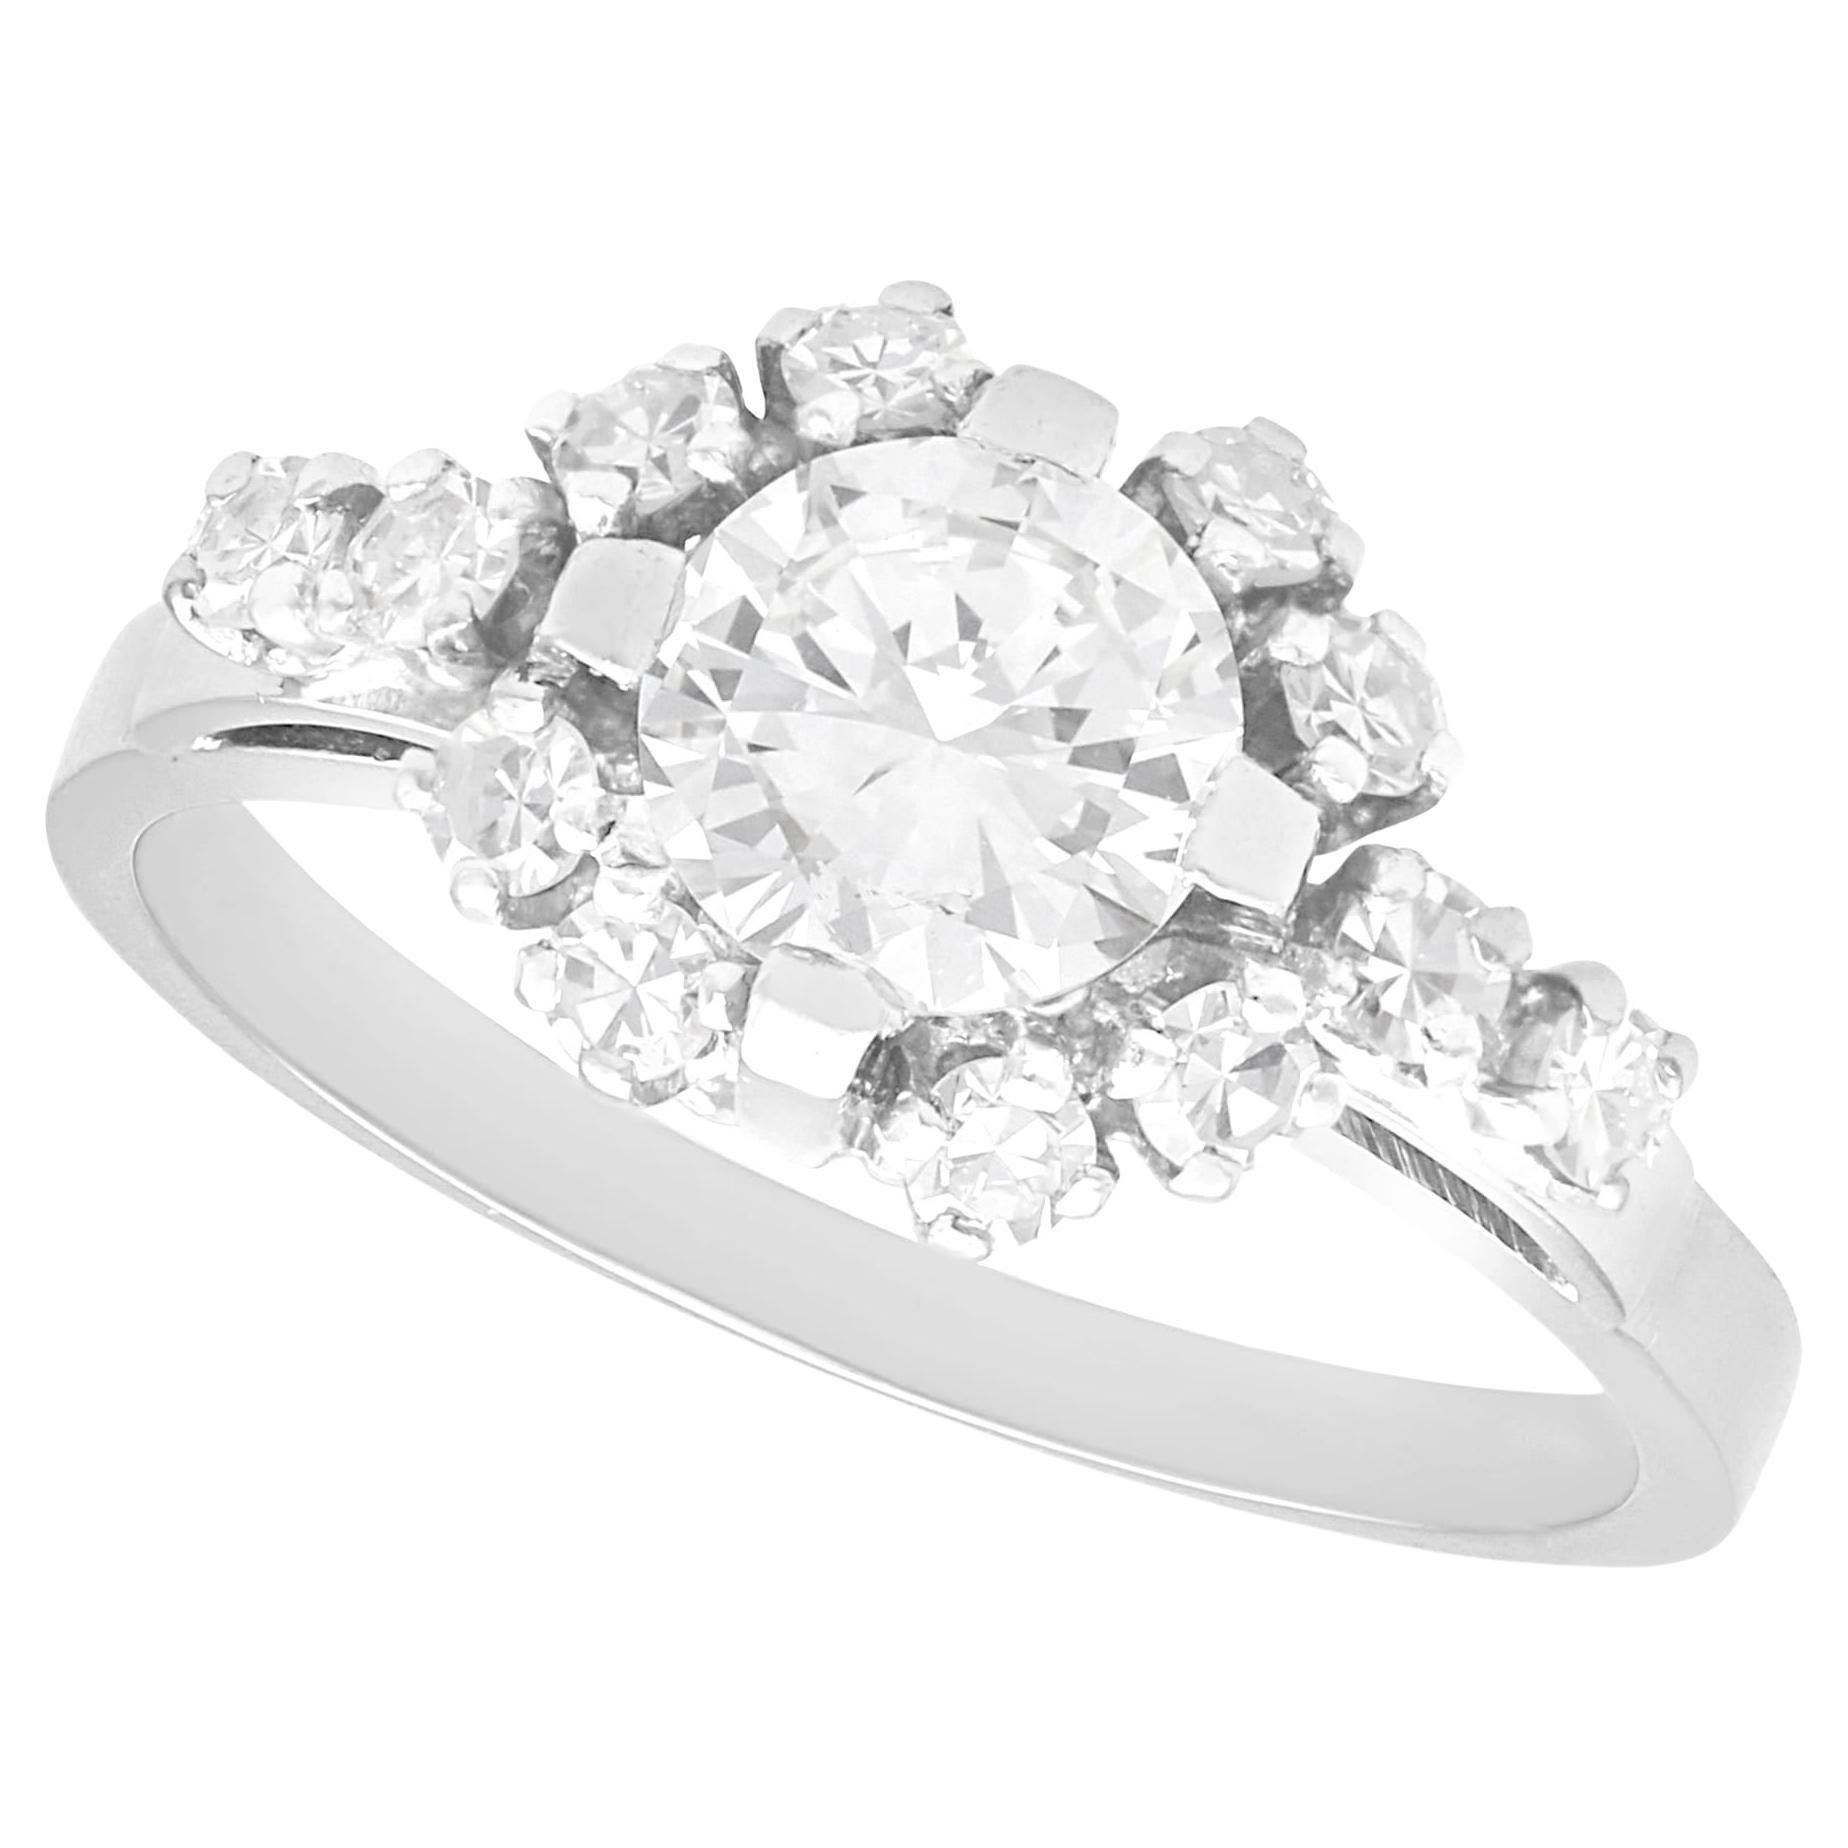 Vintage 1.09 Carat Diamond and 18k White Gold Cluster Ring For Sale